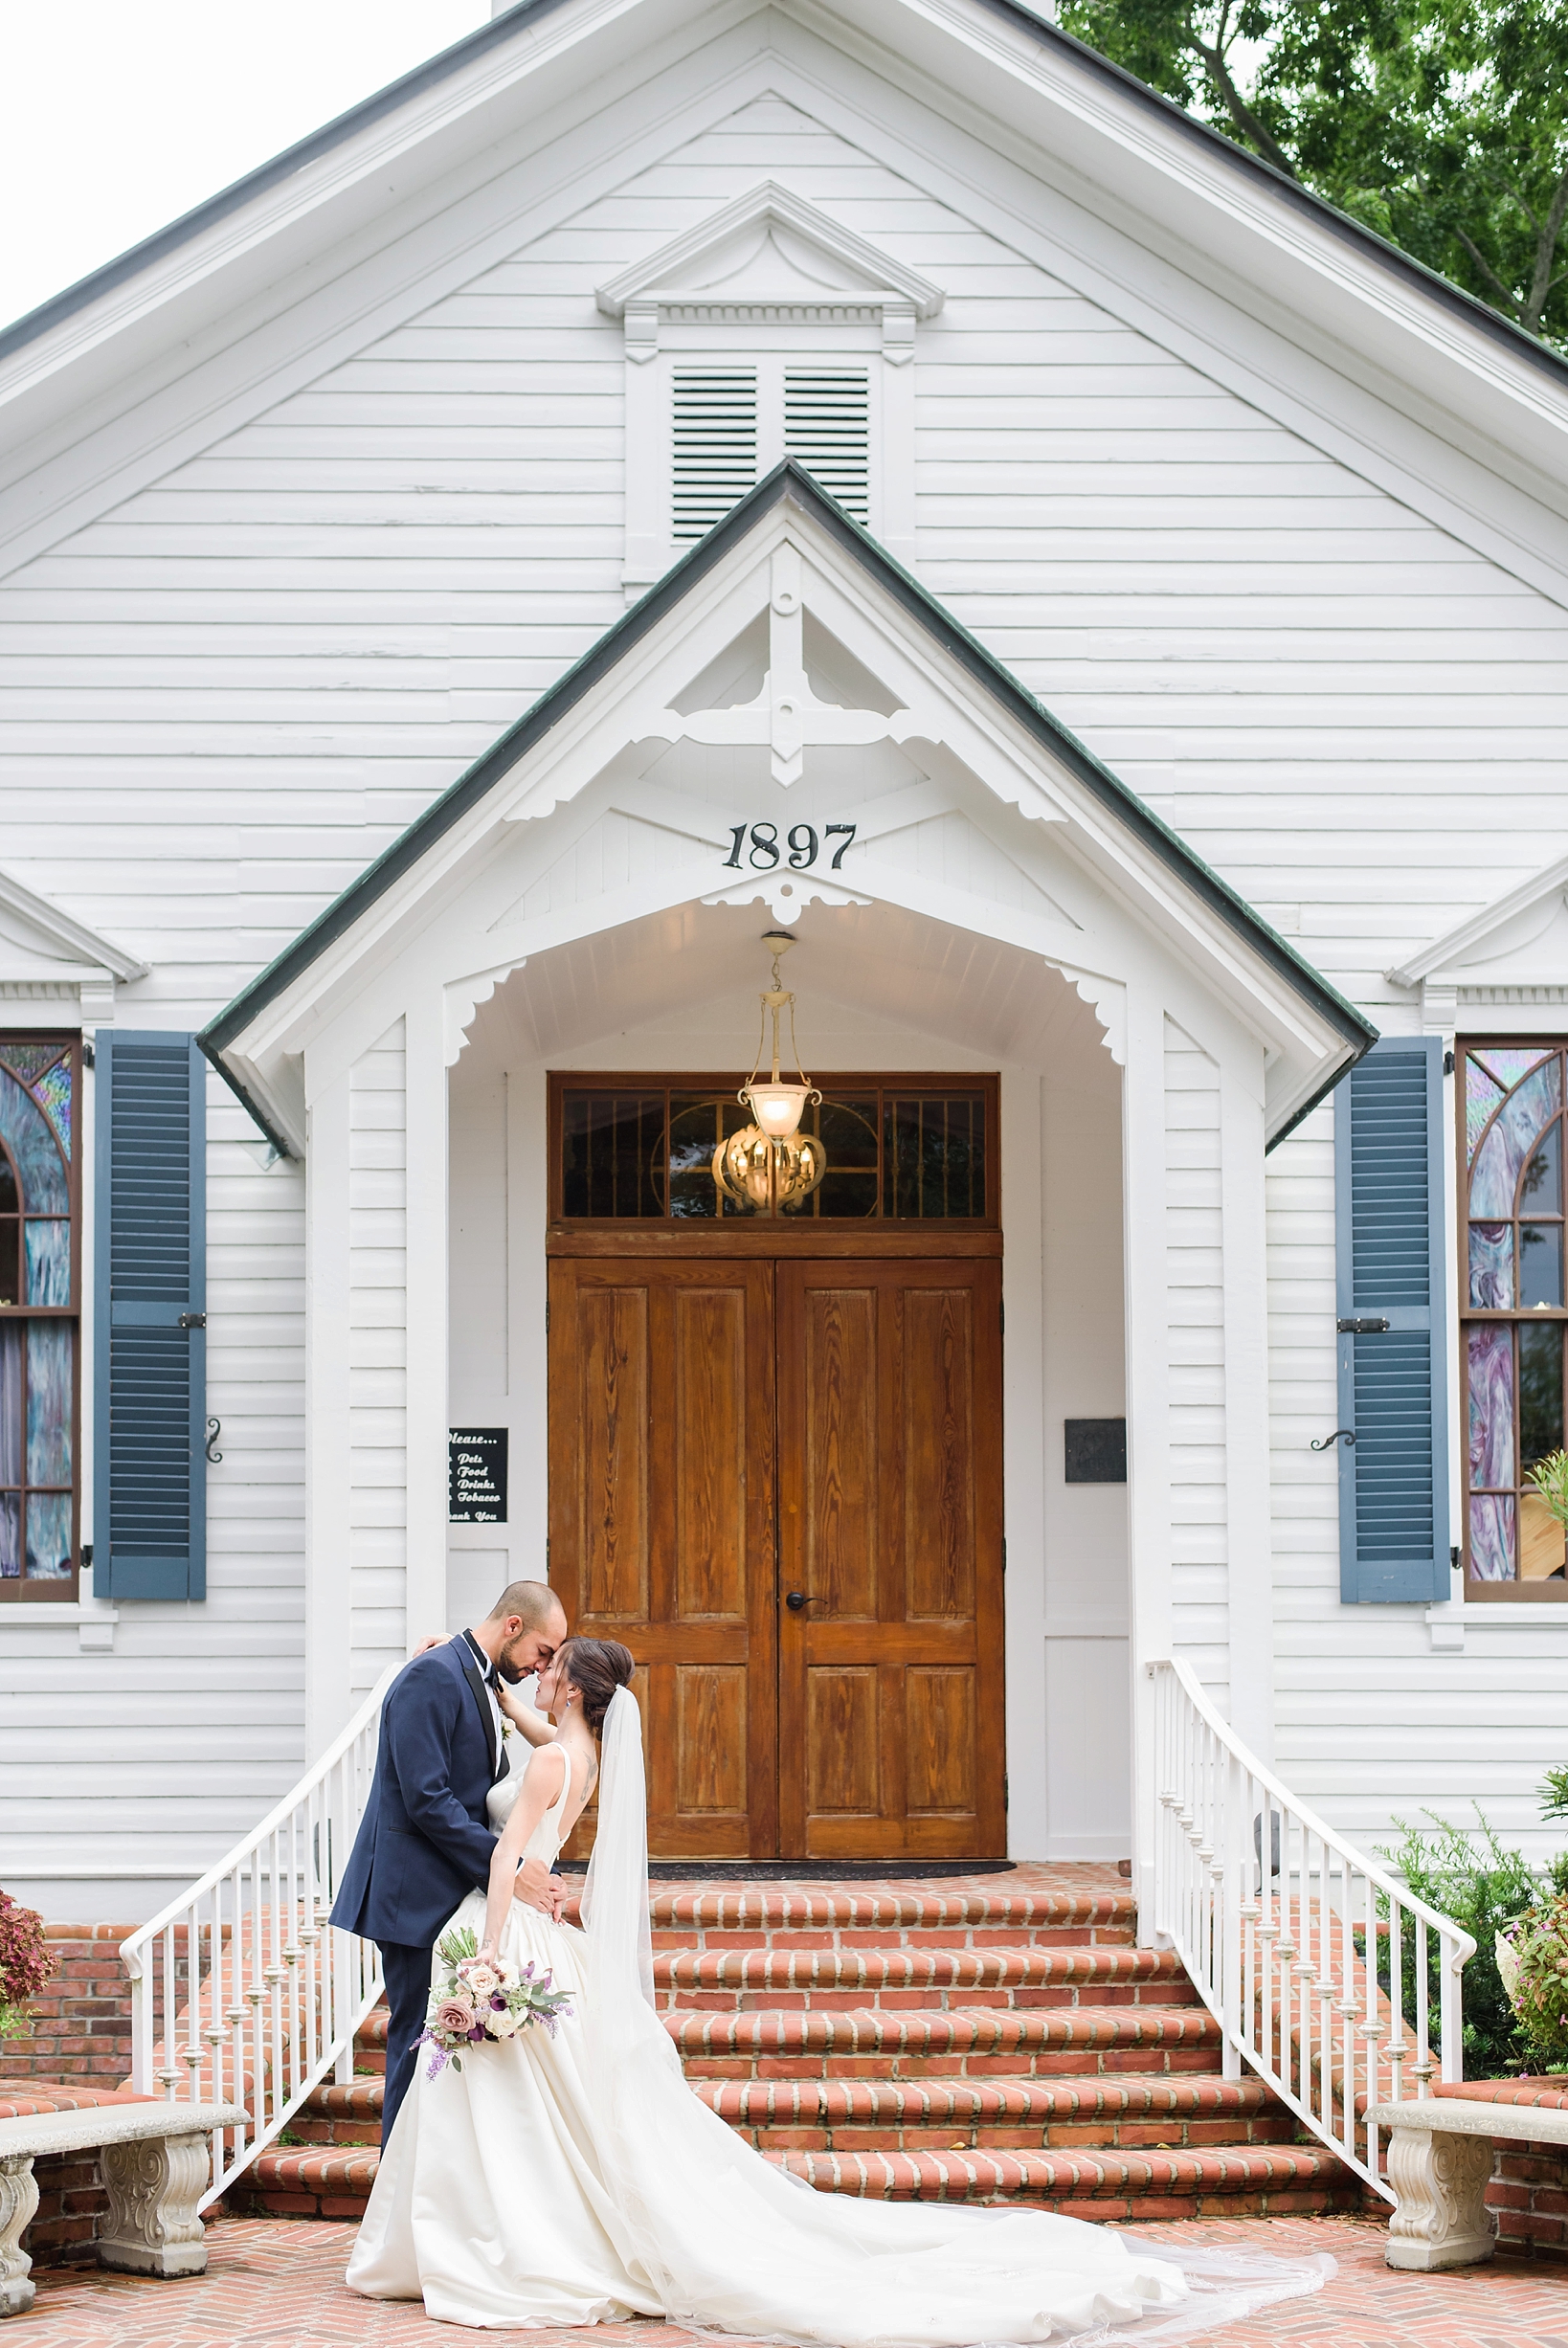 Bride and Groom share a quiet moment in front of their wedding chapel by Sarah & Ben Photography